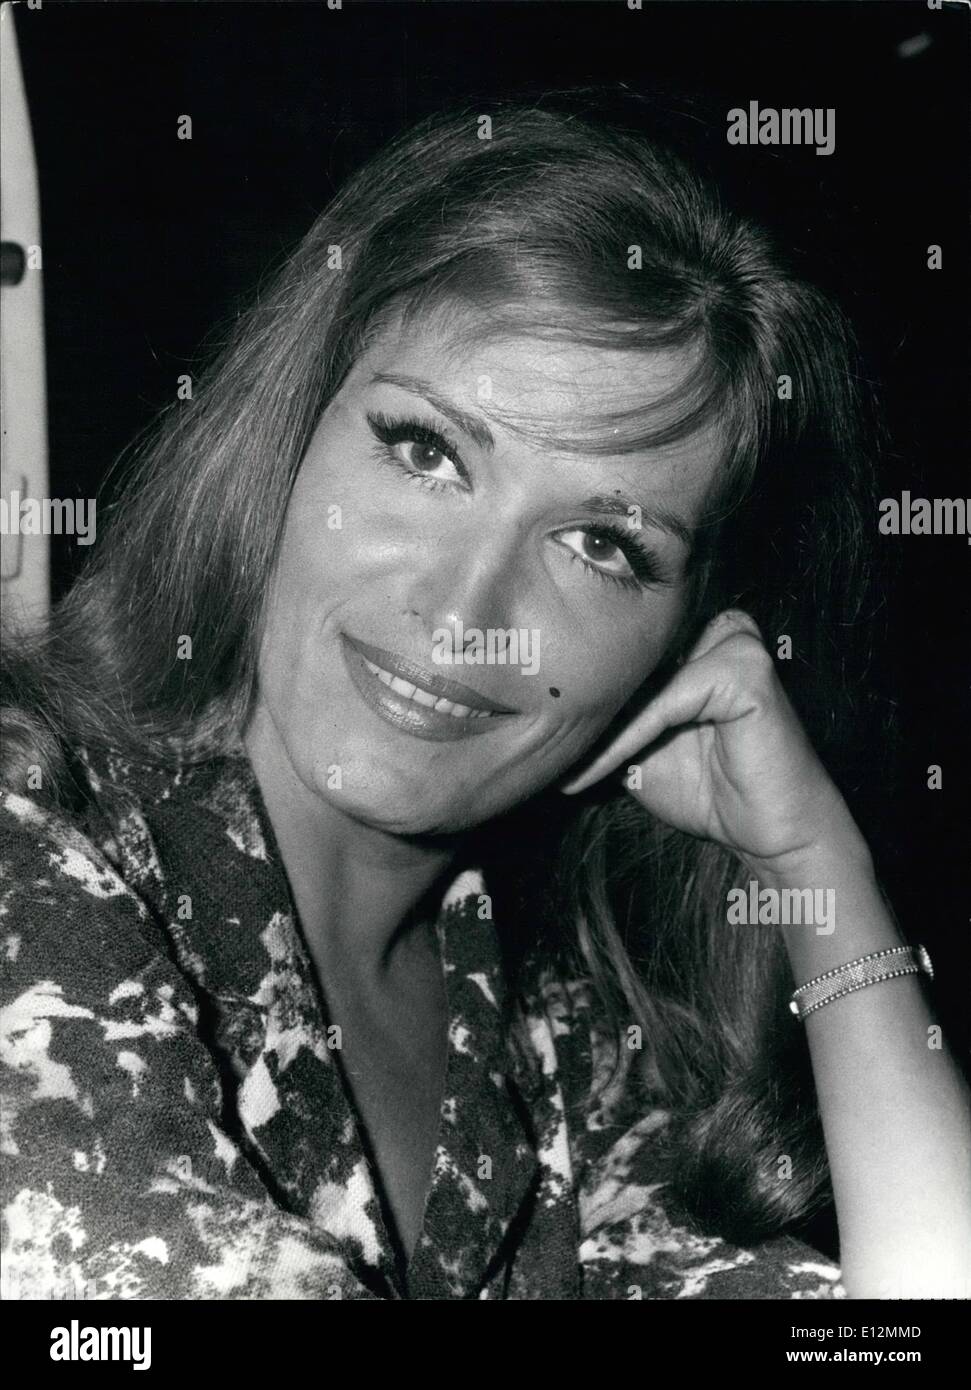 Feb. 24, 2012 - Famous French star Dalida, is in Rome to turn the film ''Italian Menage'', with actore Ugo Tognazzi. Photo shows Dalida on the set. Stock Photo